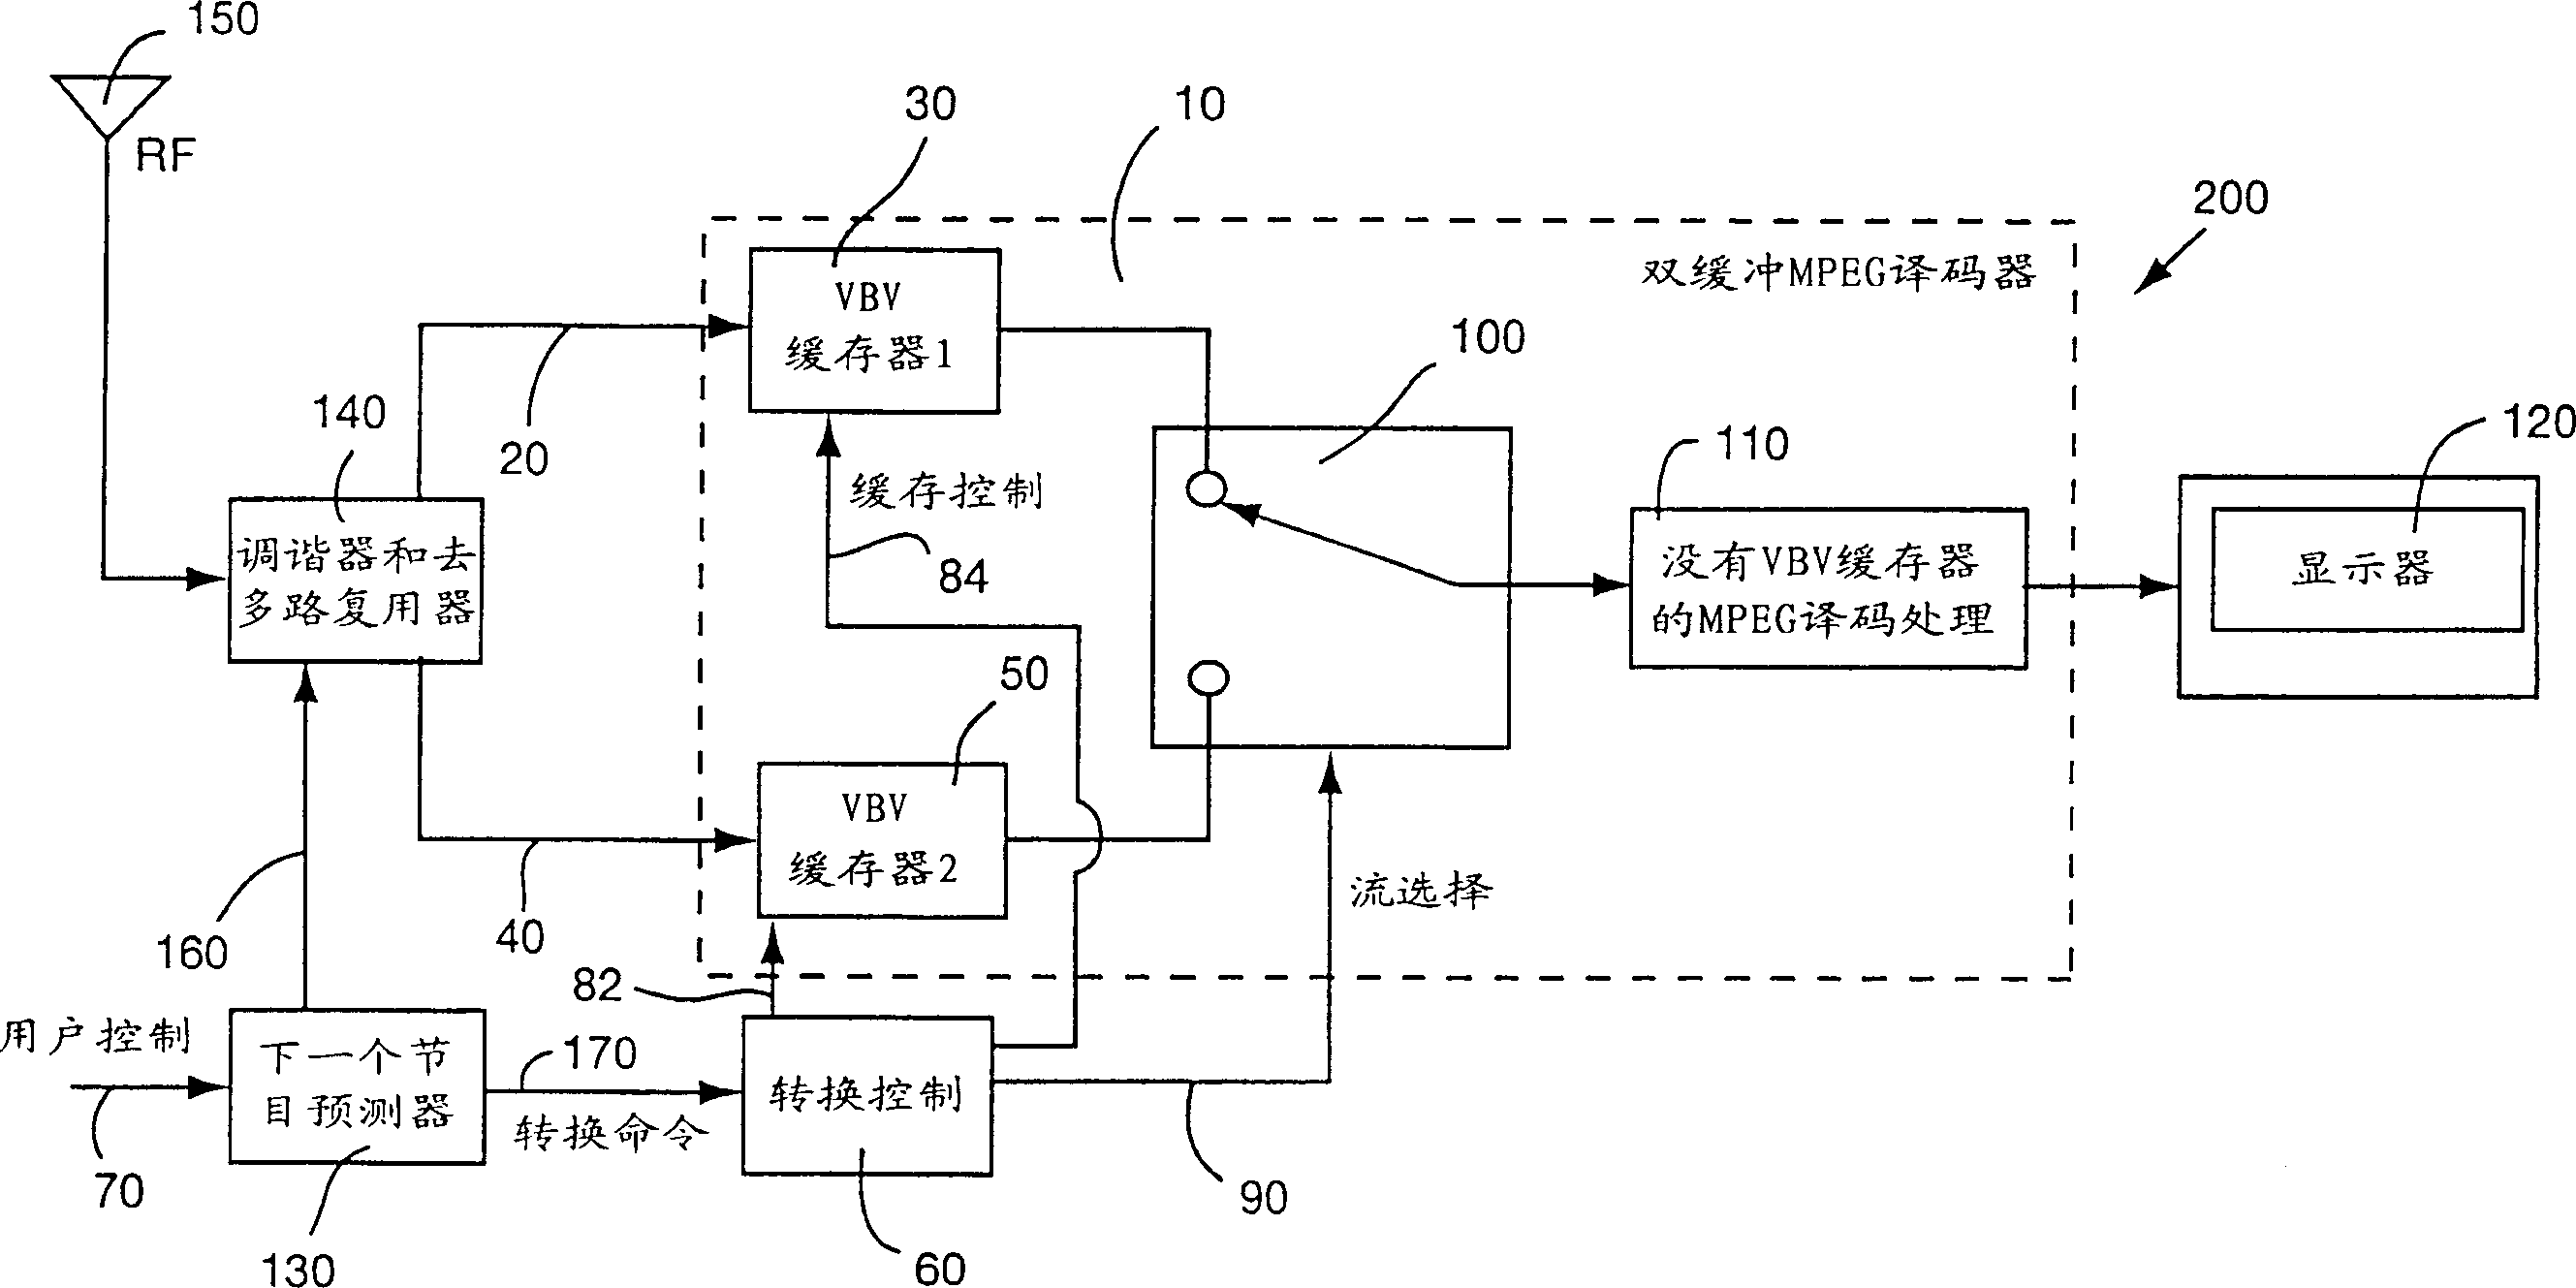 Video frequency decoding and channel trapping system